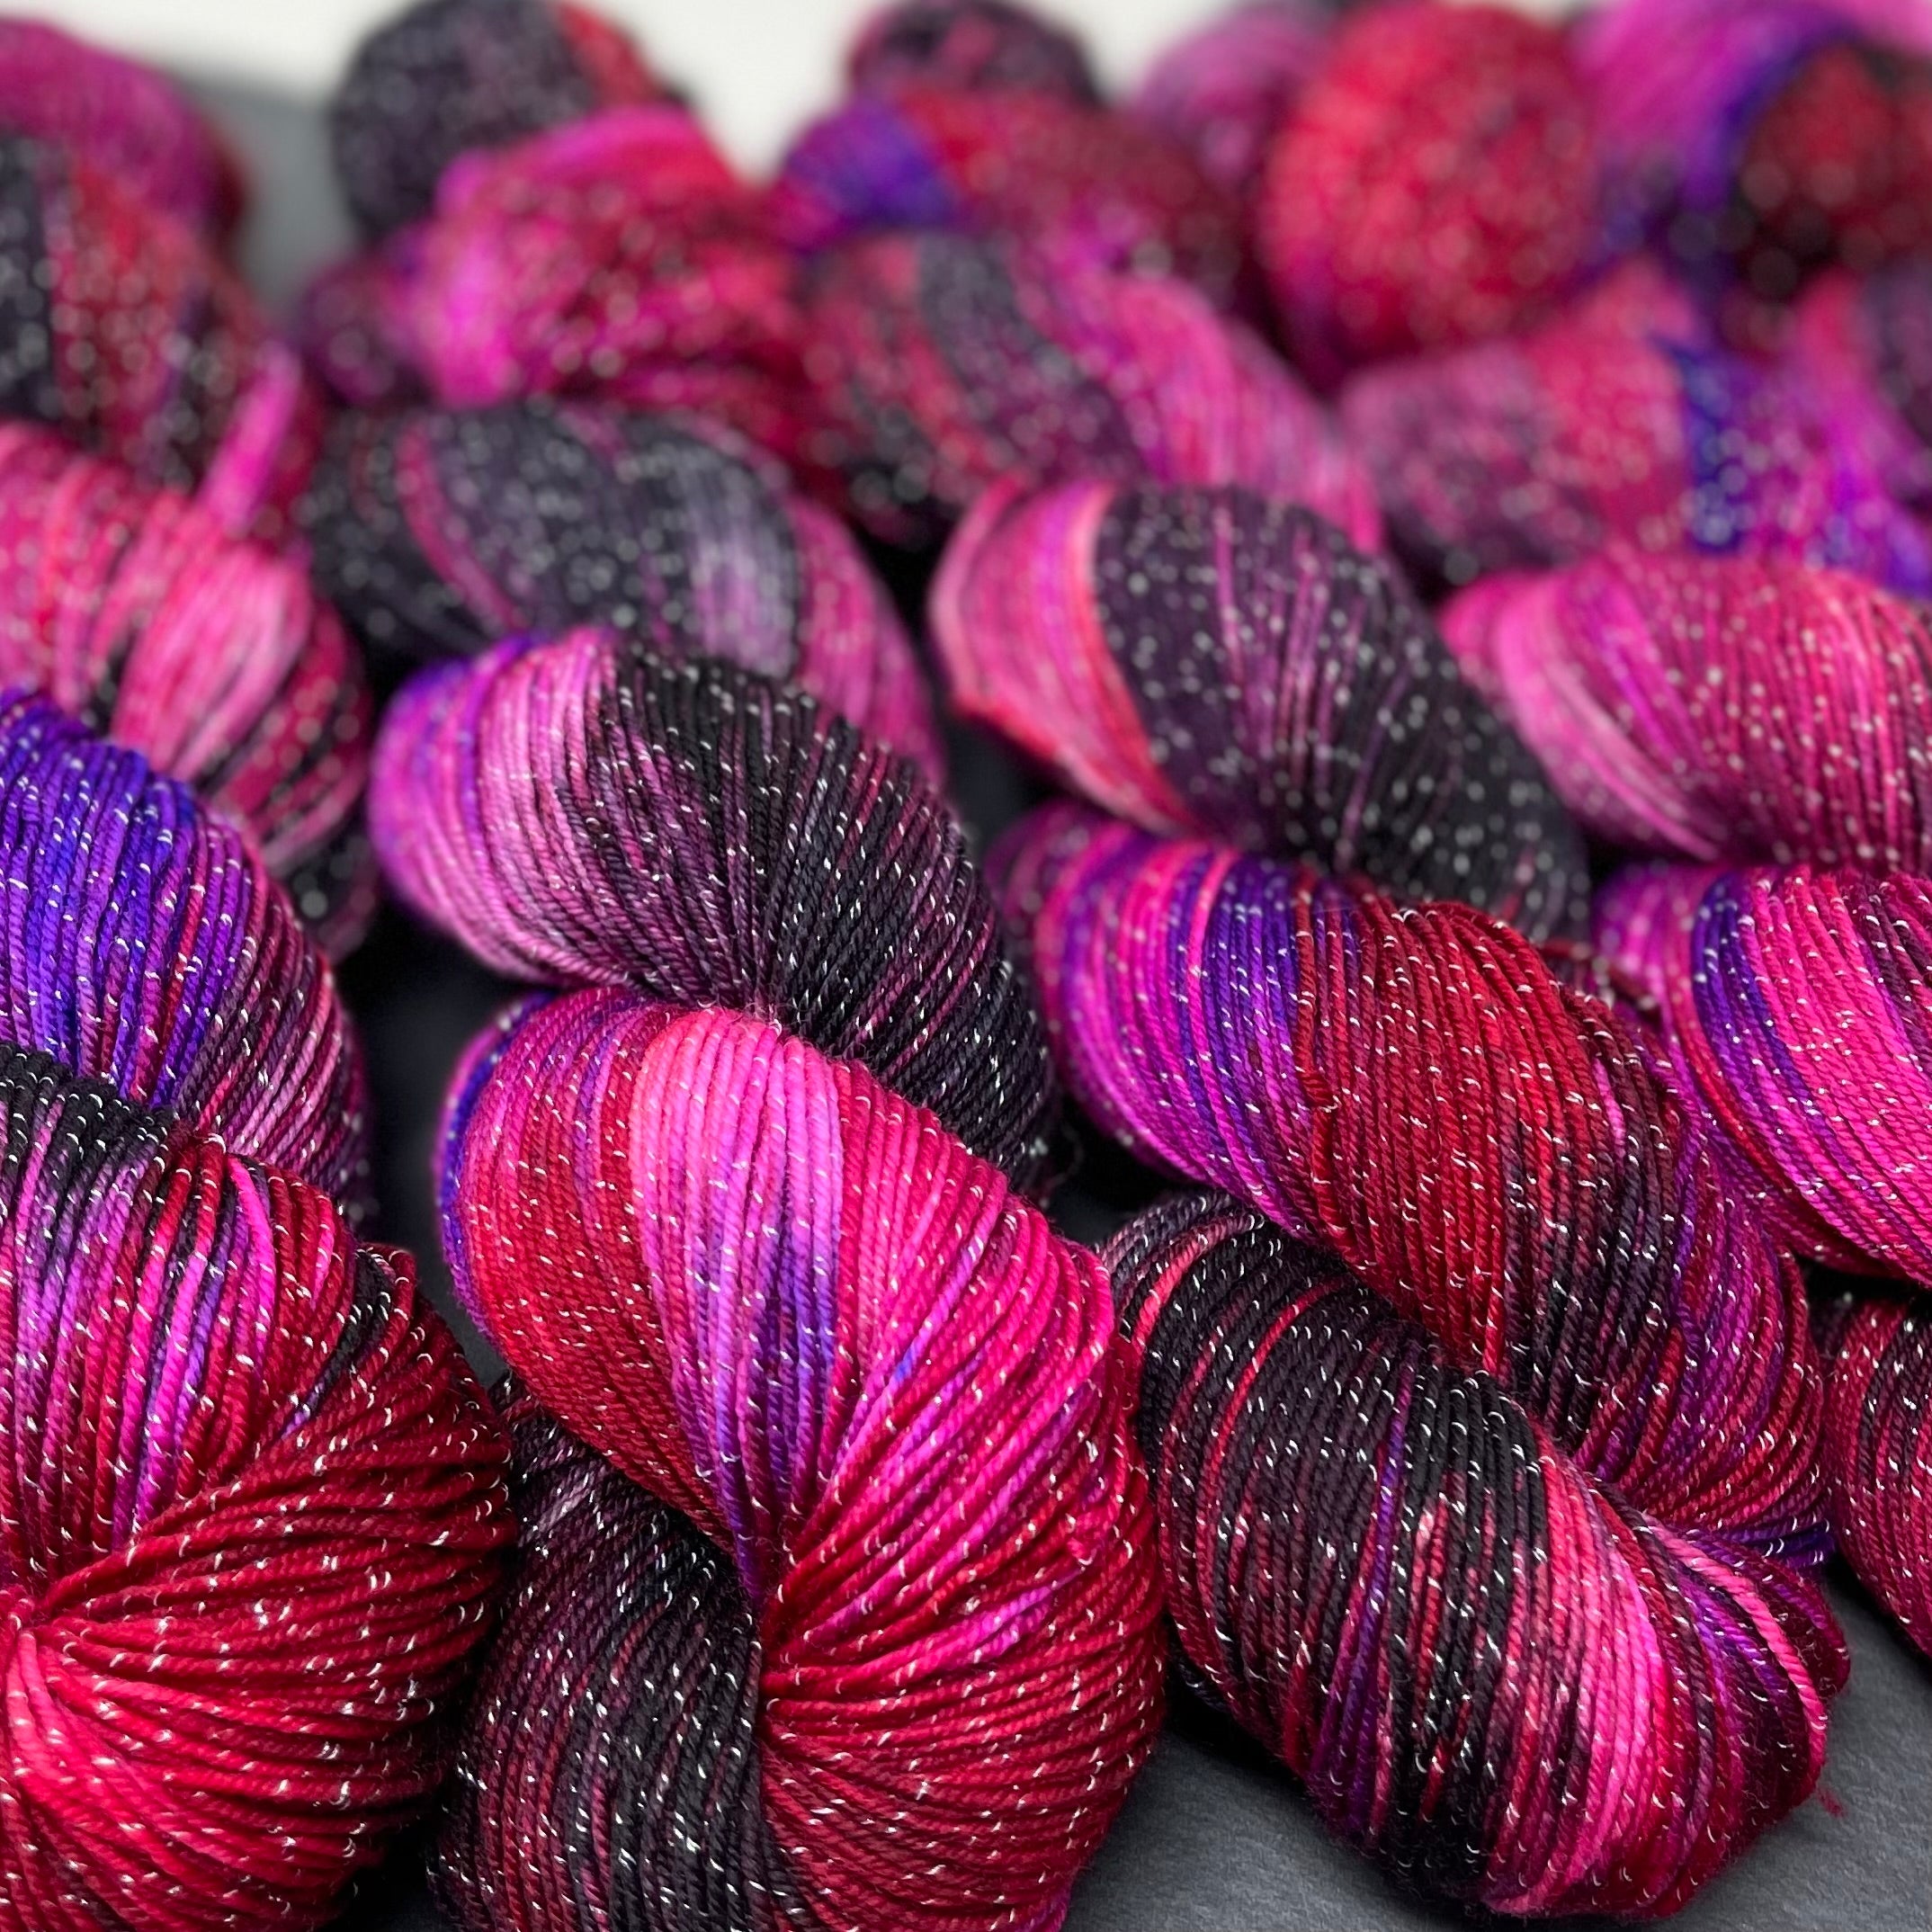 Garnet – Cashmere merino fine lace weight hand dyed yarn – Gradient yarn –  Turquoise to Purple – Violet Lynx Dyeworks